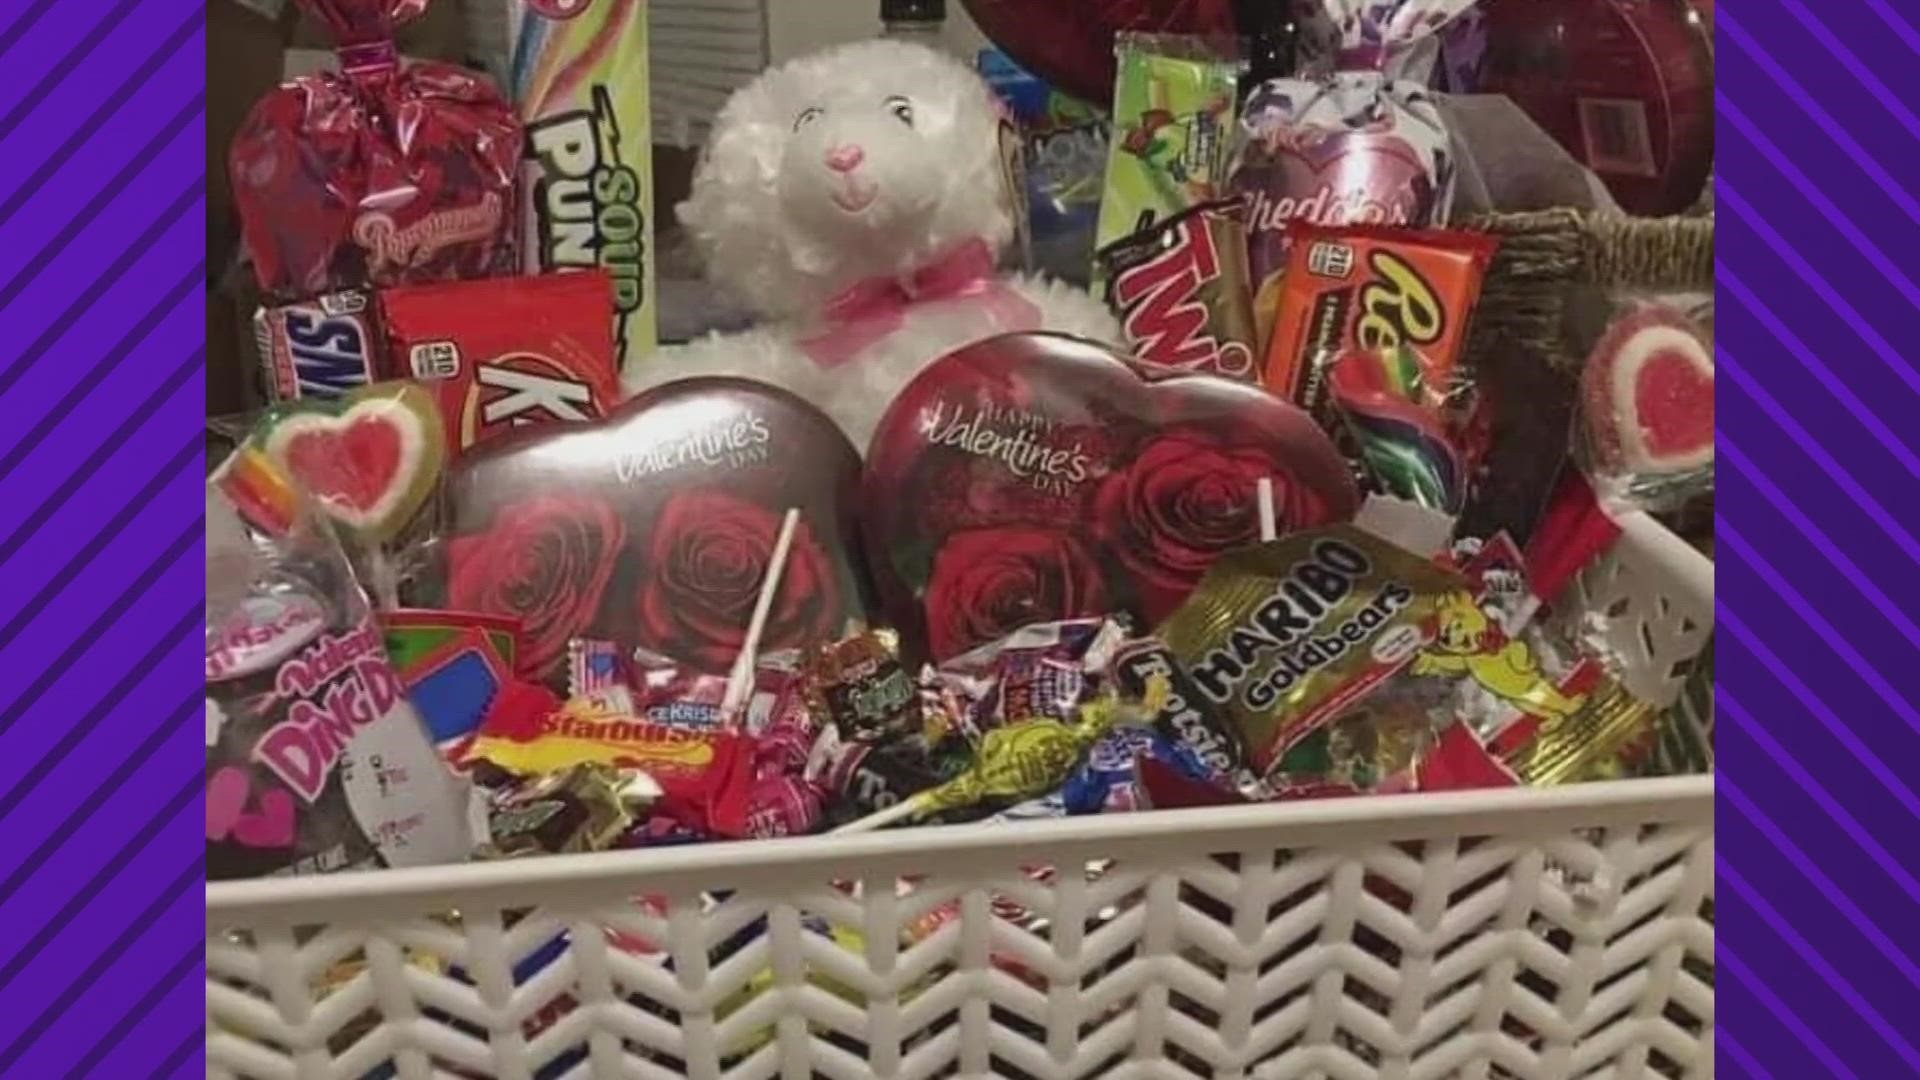 A 17-year-old girl from Temple says she is donating Valentine's Day gifts to teachers and parents in the area.